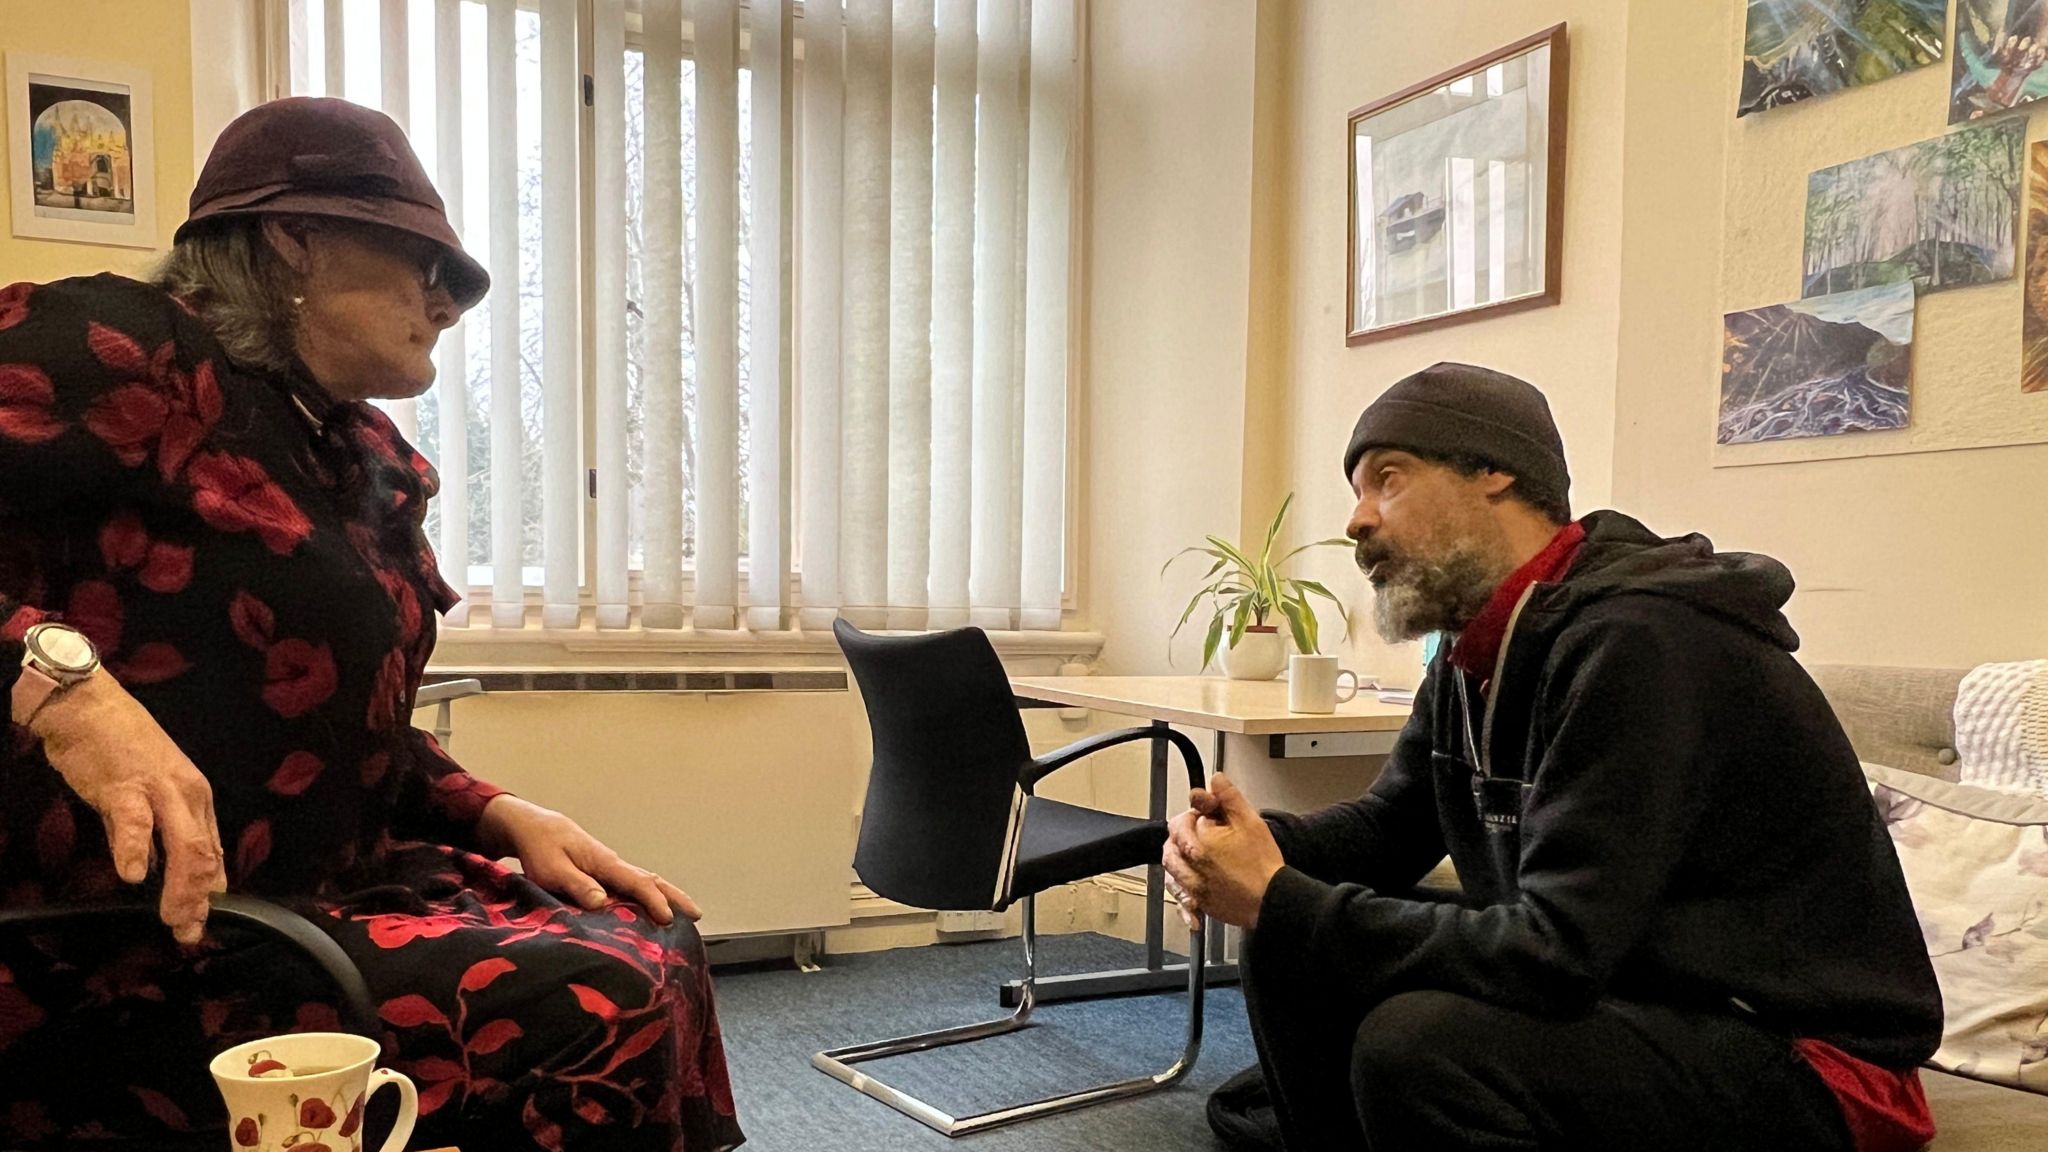 Support worker and homeless client getting support